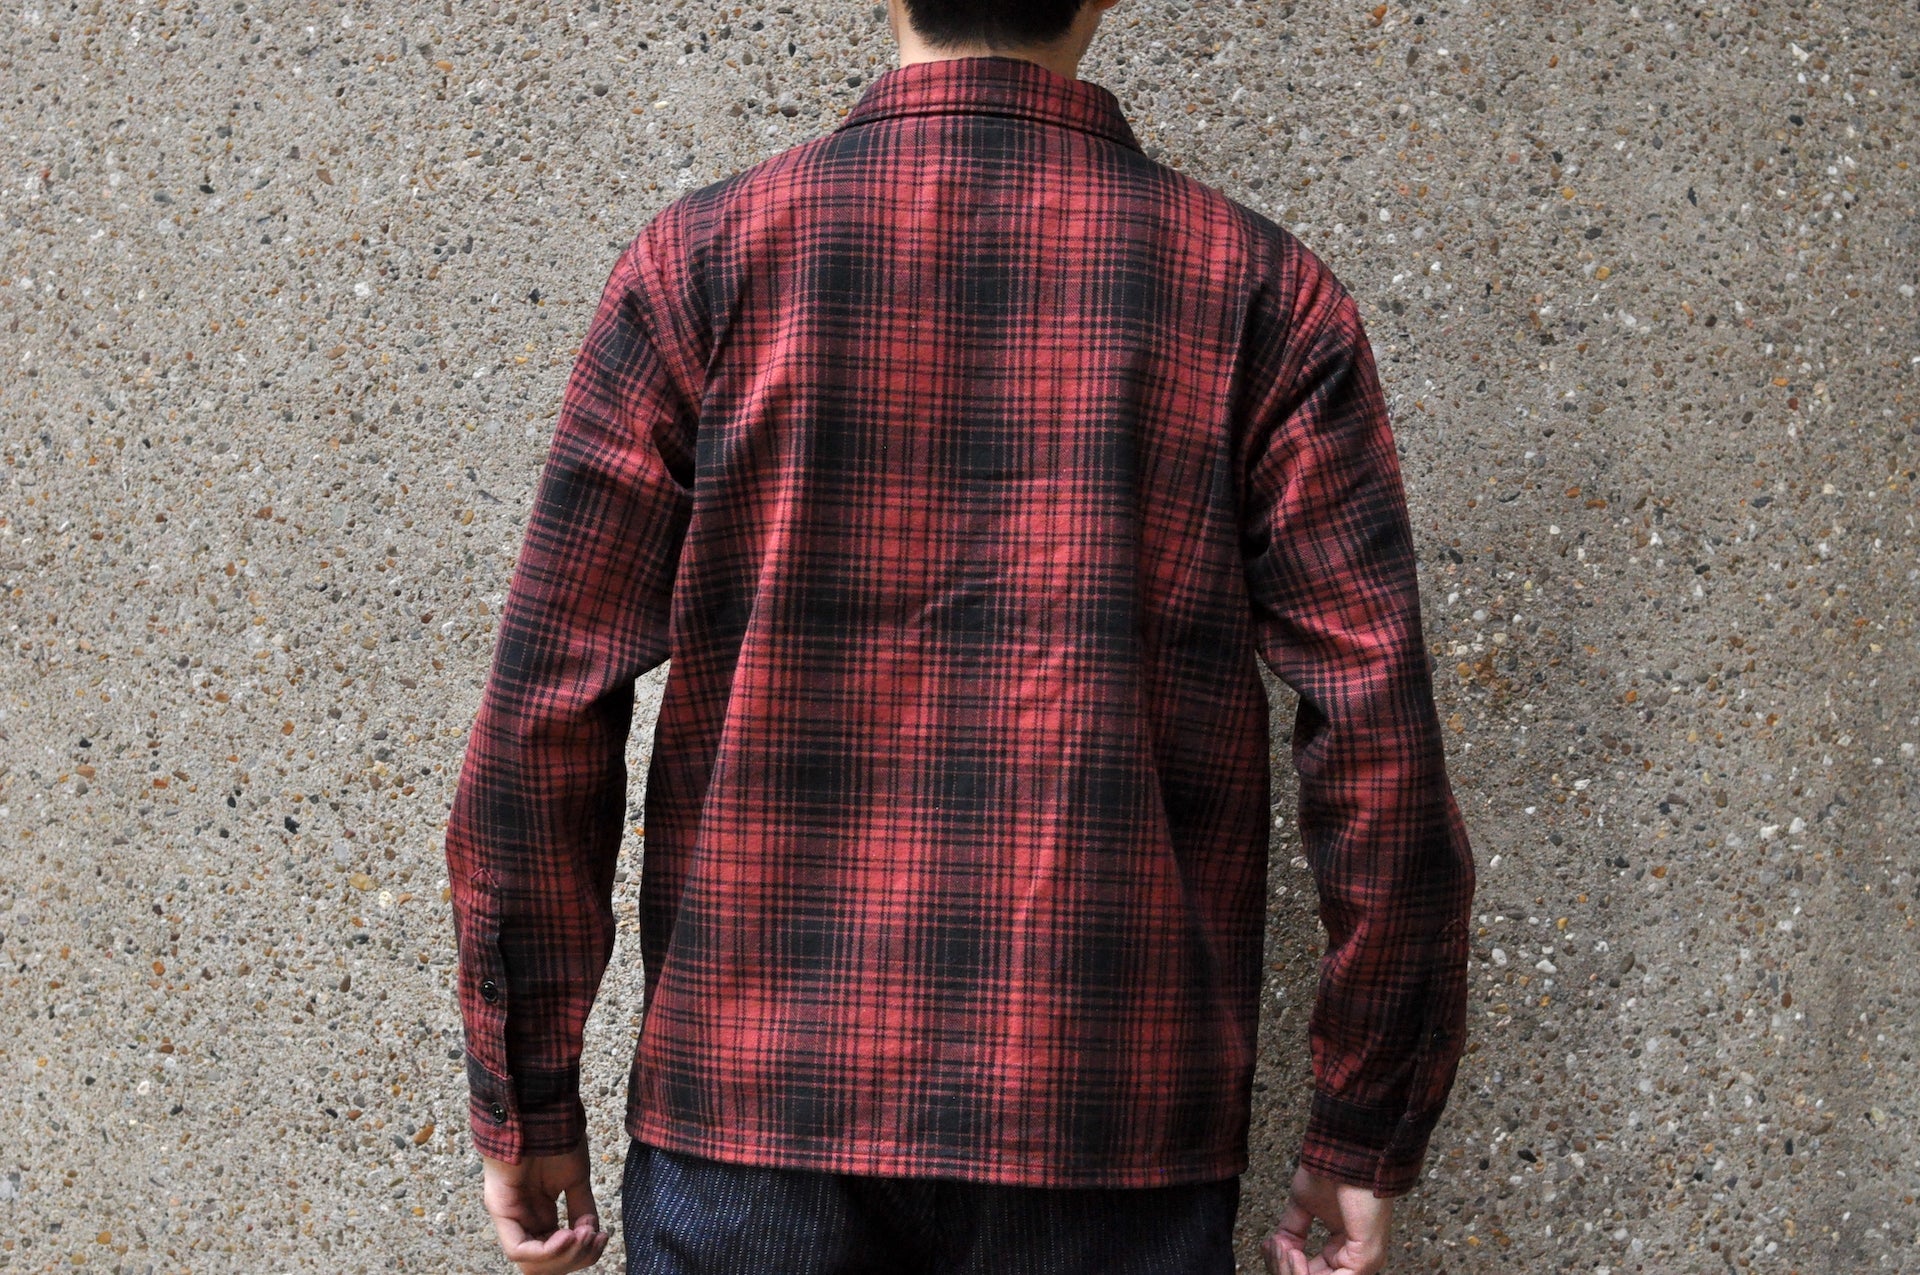 Stevenson Overall Co. "Duck Shooter" Flannel Hunting Jacket